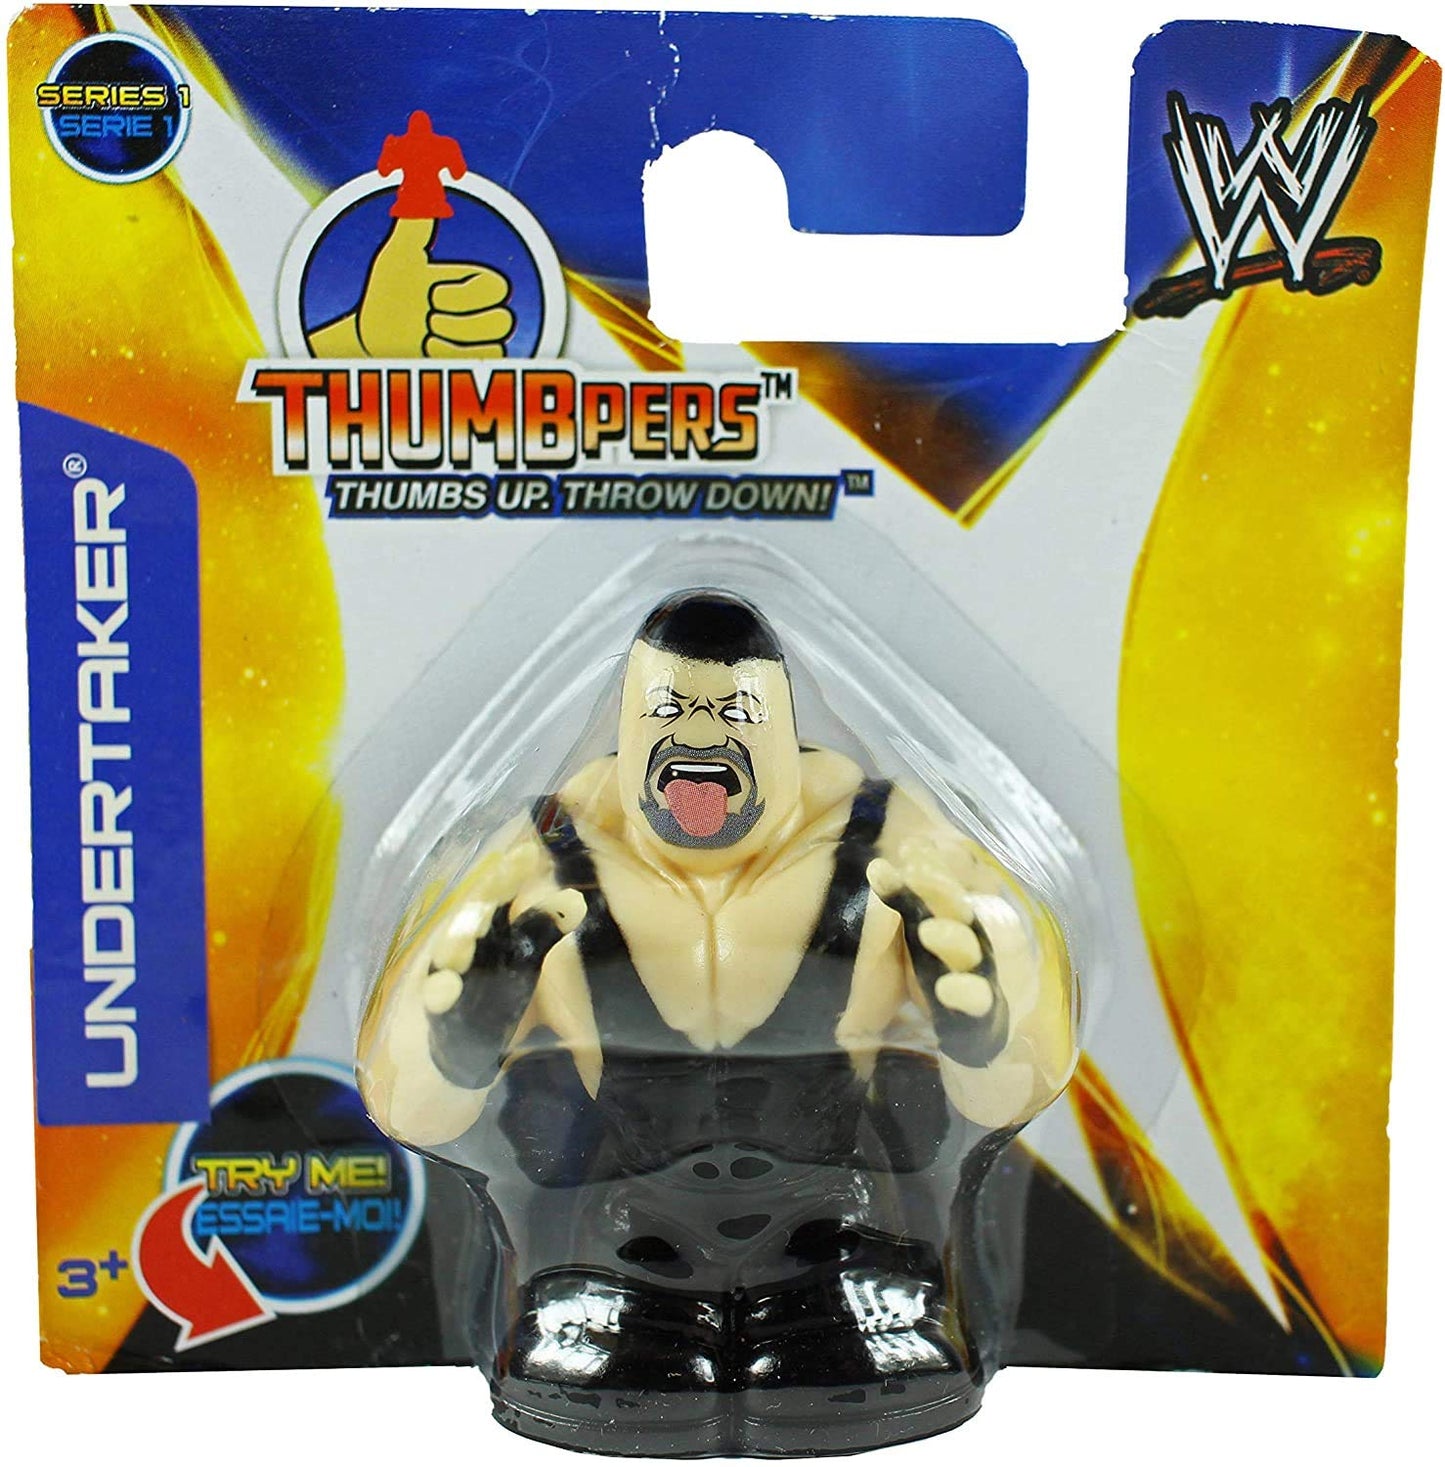 2013 WWE Wicked Cool Toys Thumbpers Series 1 Undertaker [Carded]